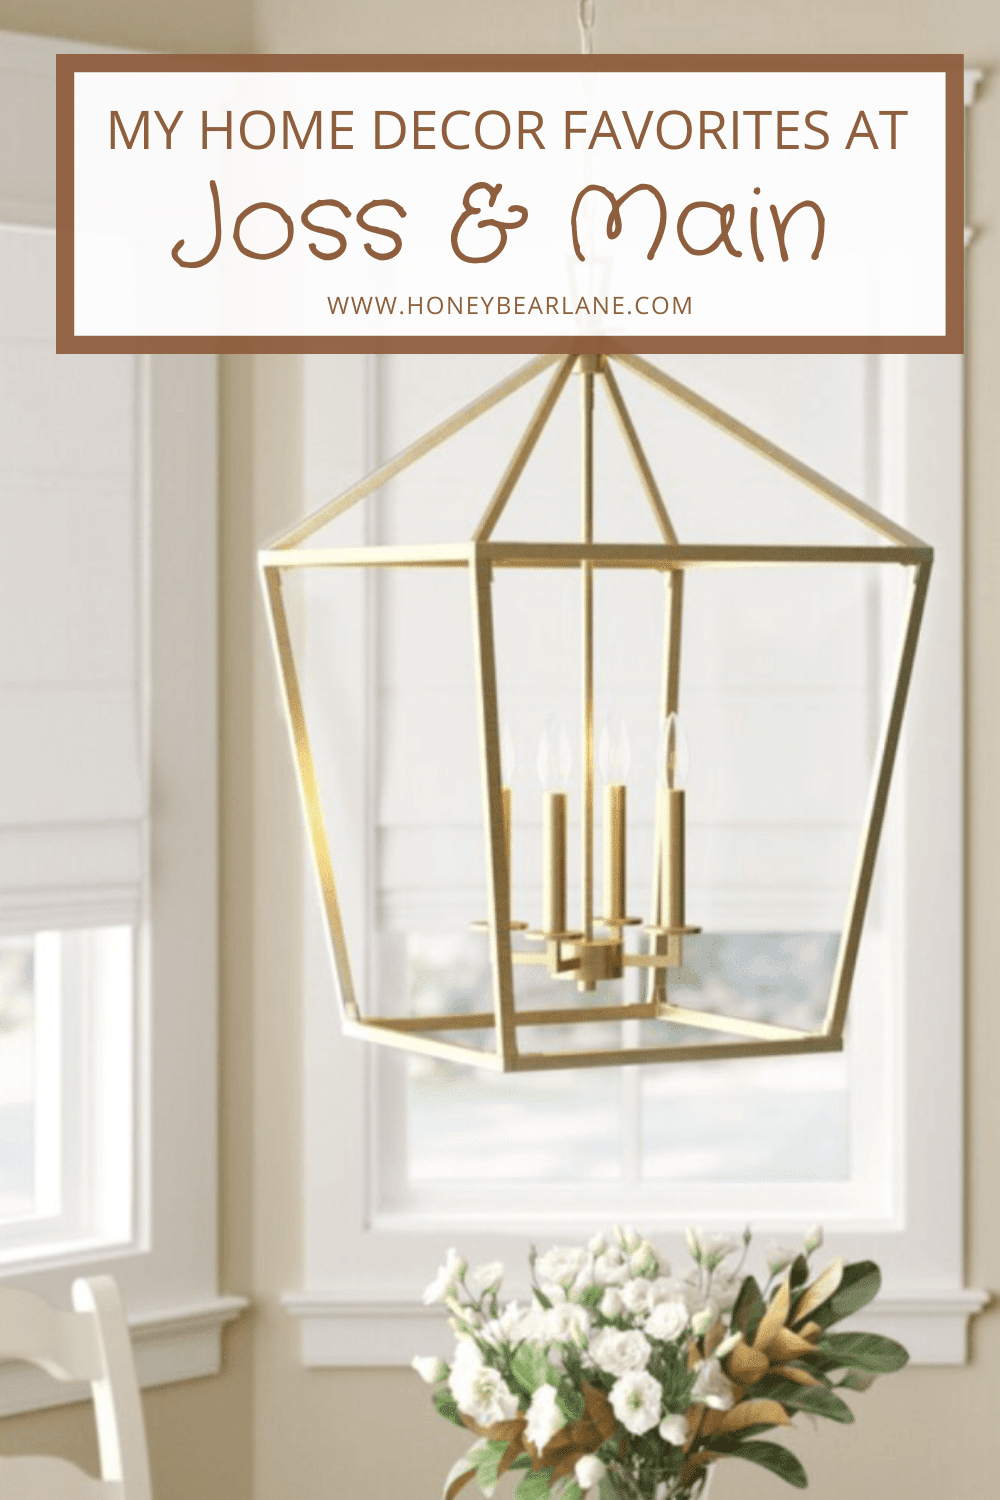 My Favorite Decor Items at Joss & Main - HoneyBearLane; This Warm Brass Israel 4-Light Lantern Pendant will most likely be my next big purchase. I have loved these for SO long but they are a little pricey (over $300 each) so I’ve been saving up and waiting for a sale. However I have looked at all the dupes and nothing is as pretty.